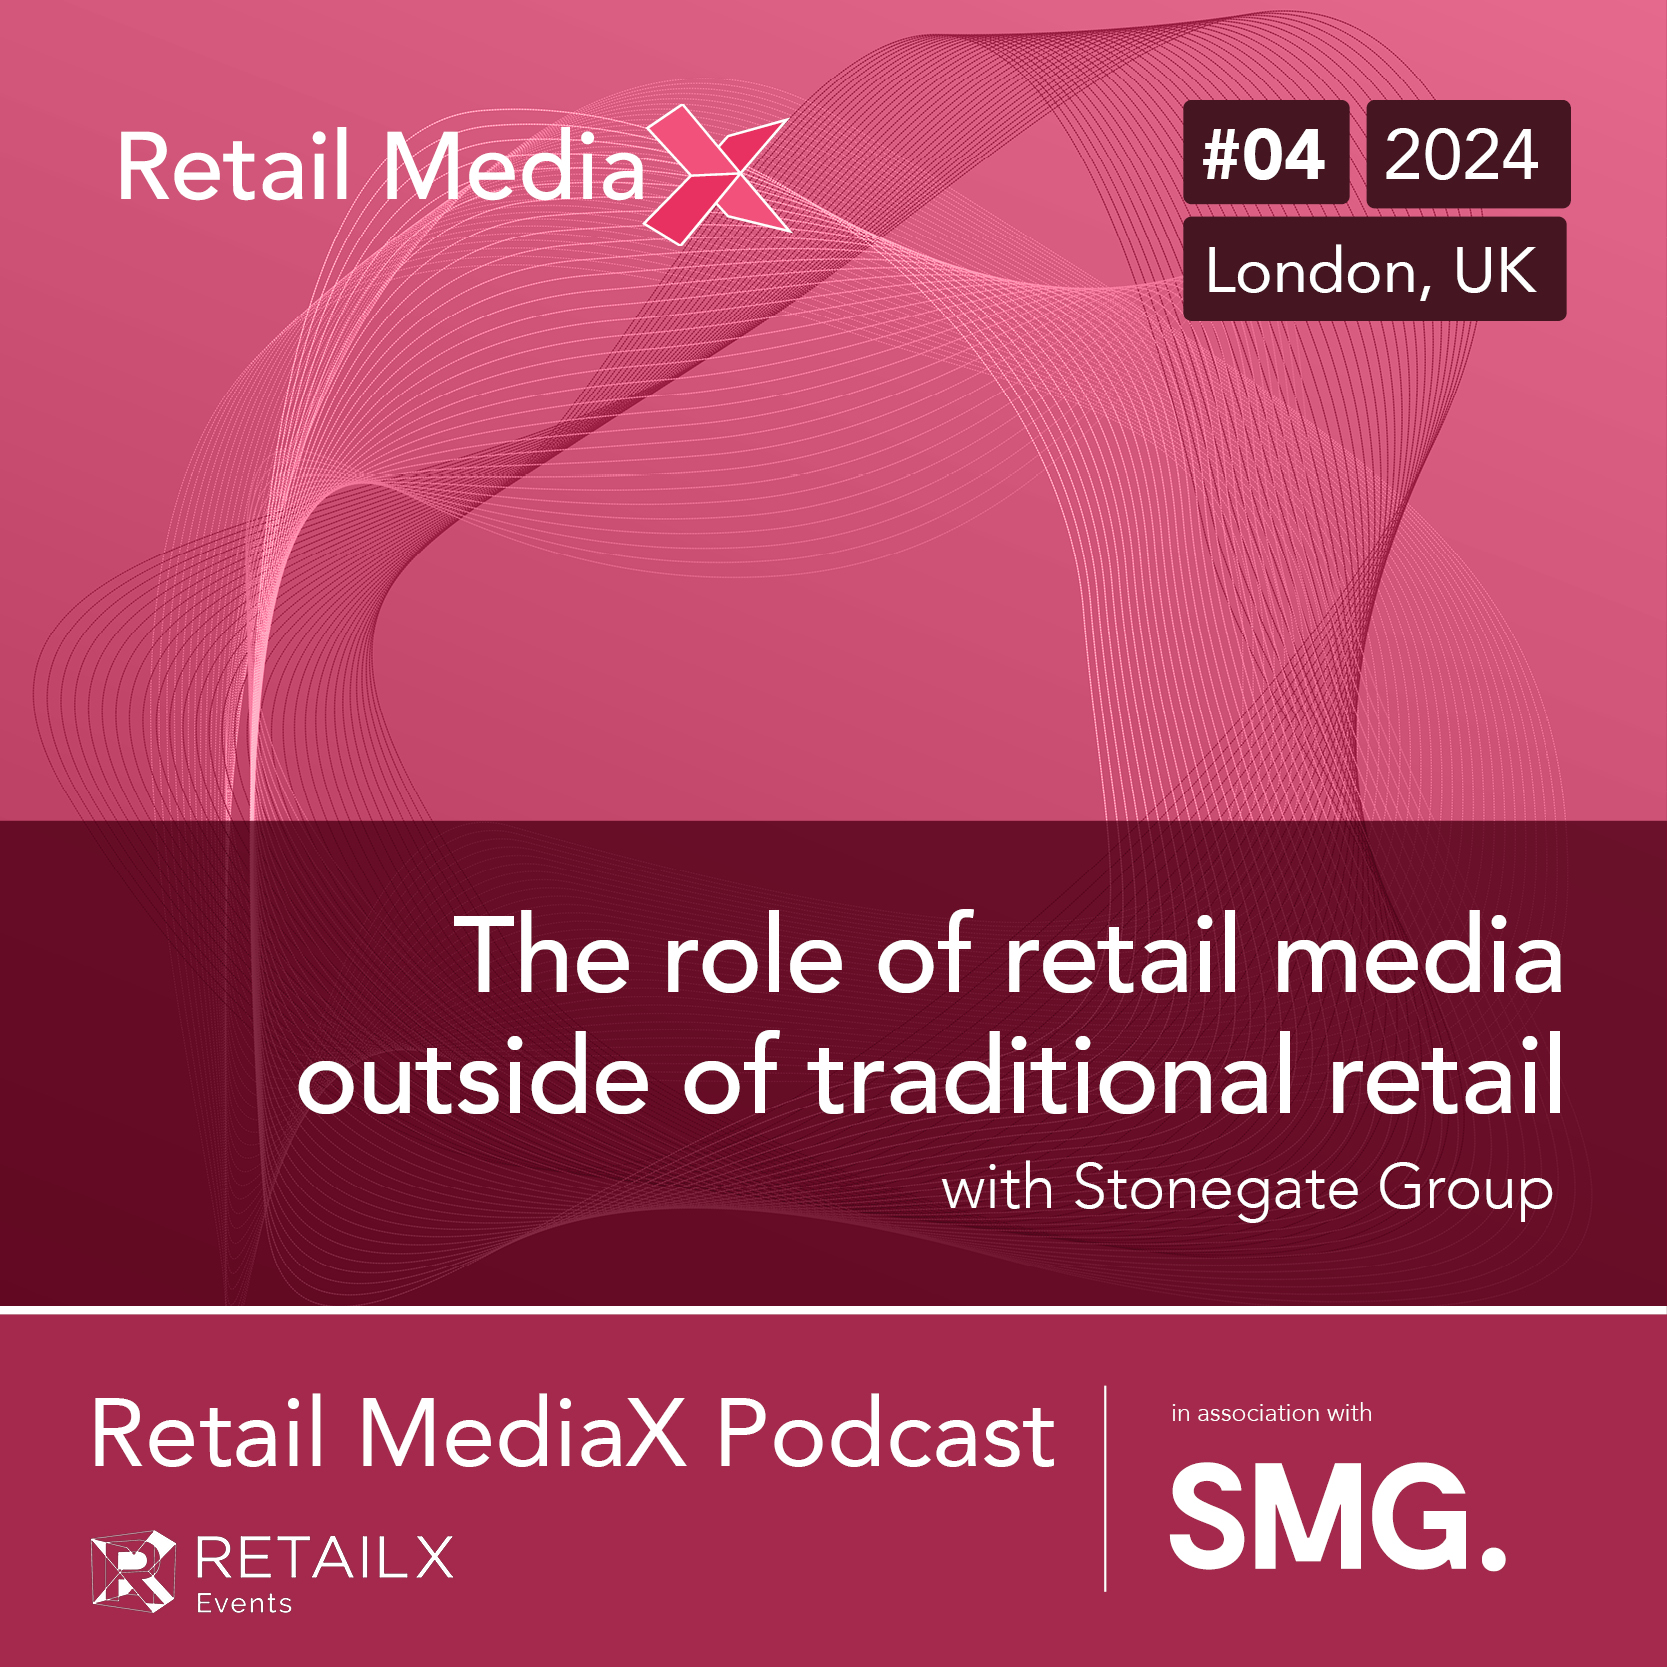 Retail MediaX Podcast - Stonegate